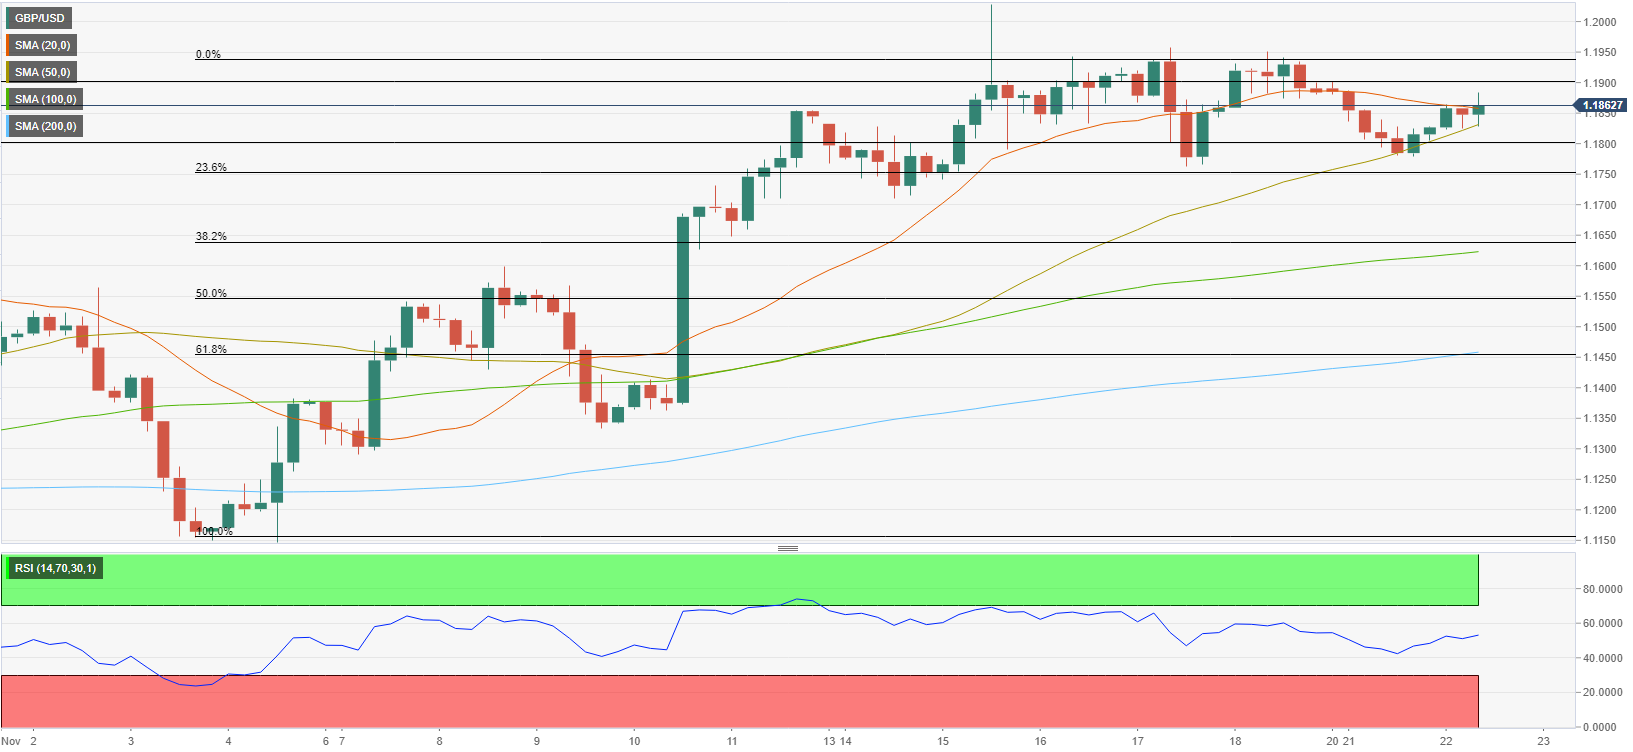 Pound Sterling Price News and Forecast: GBP/USD eases from daily high - FXStreet